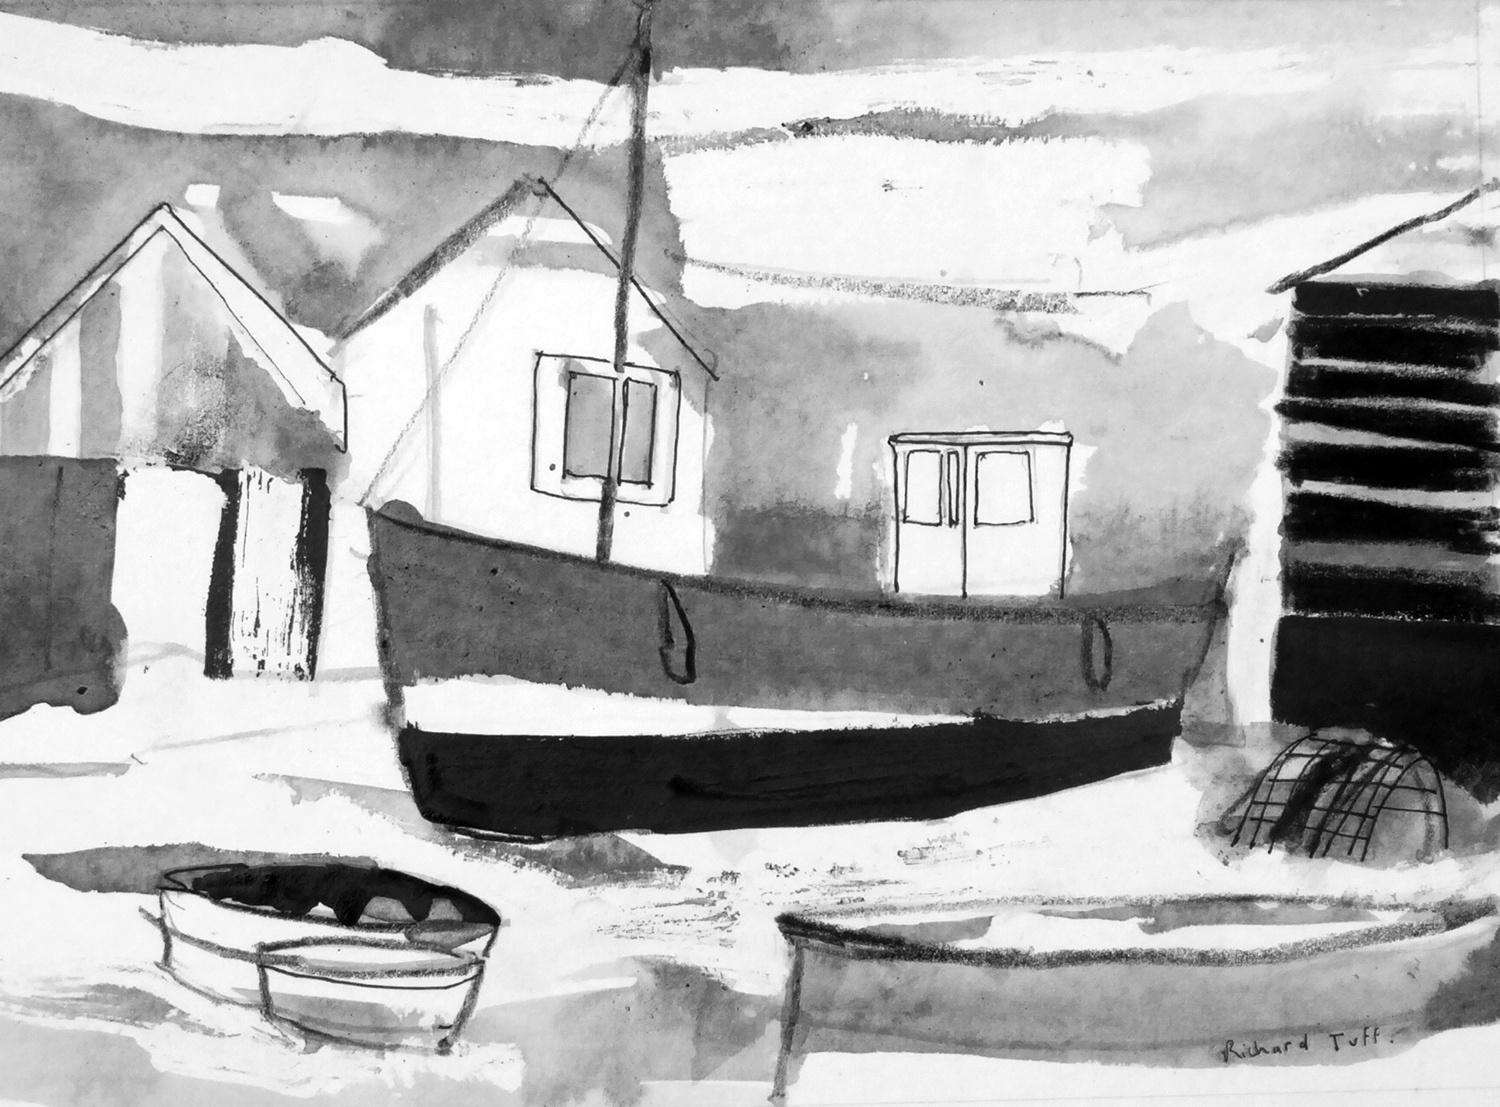 Orford Boat Sheds by Richard Tuff